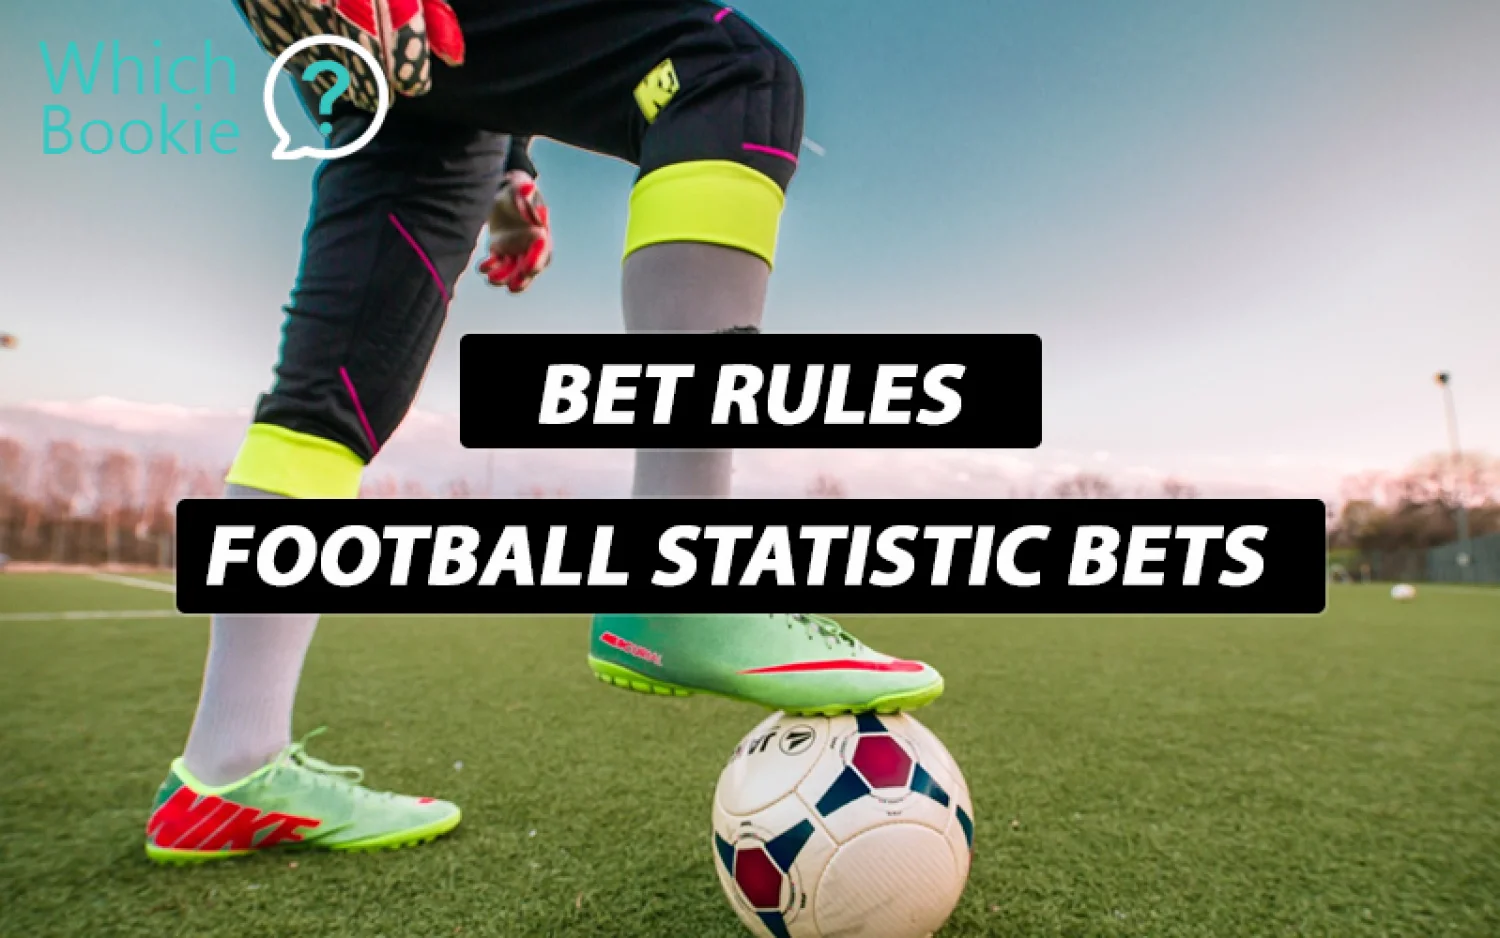 can you bet on football games online